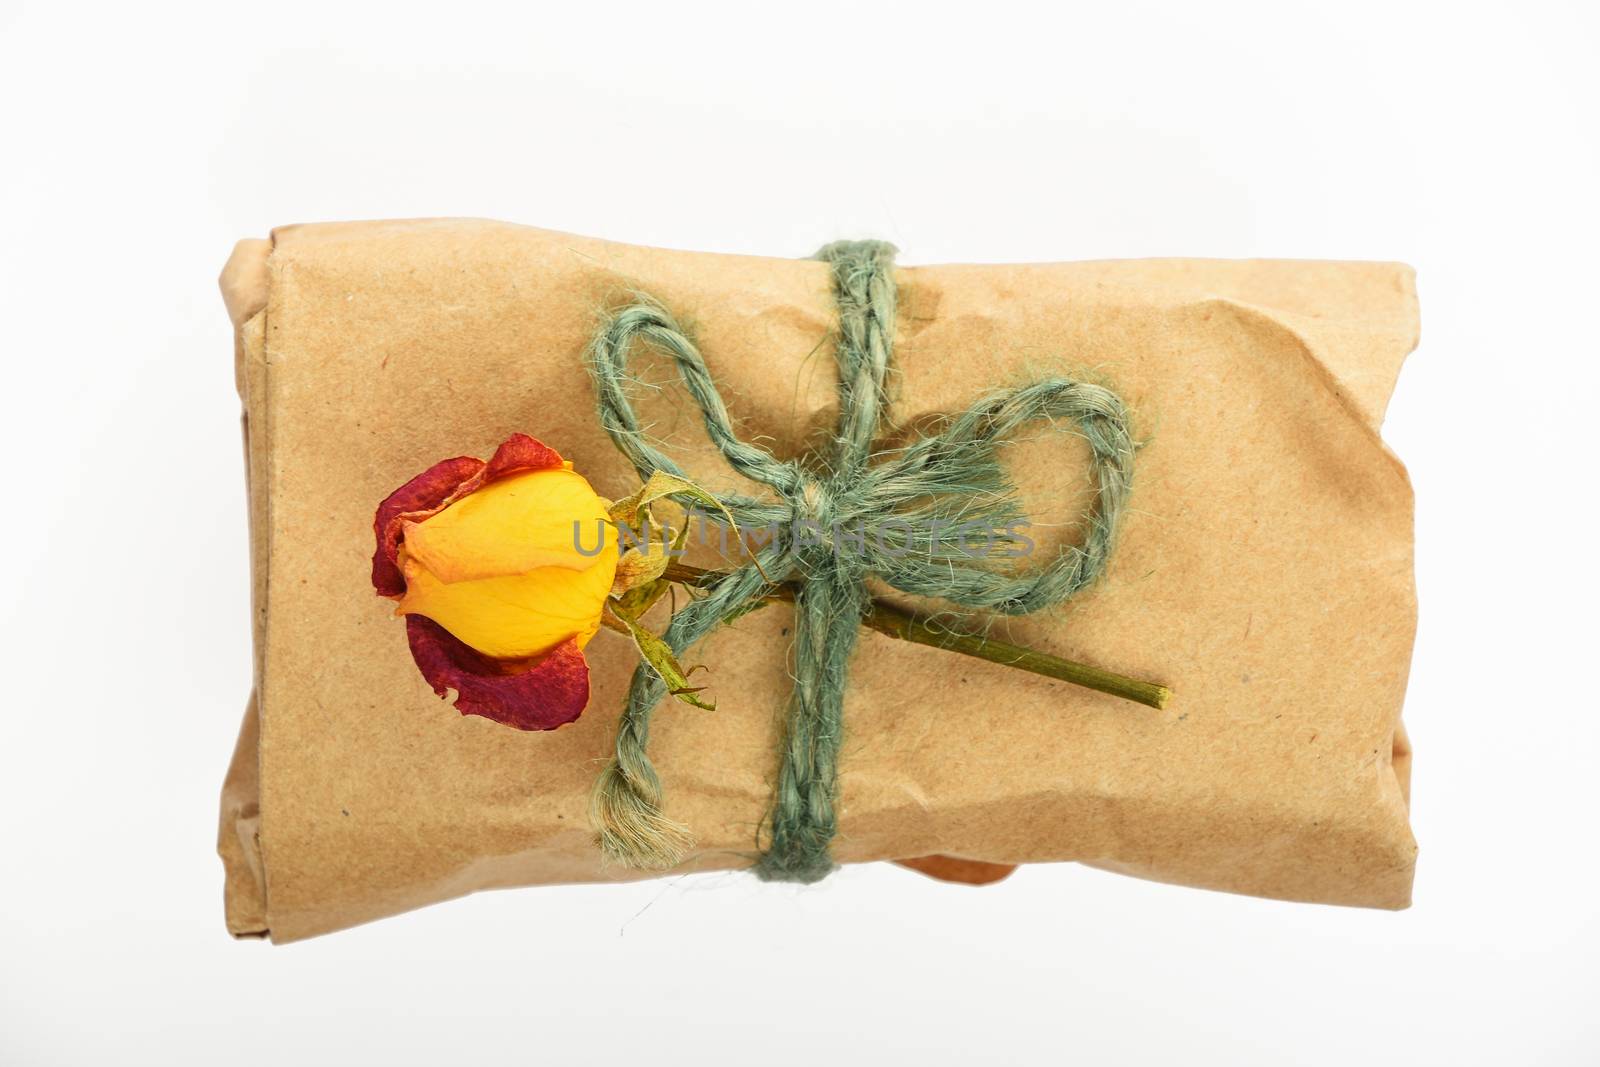 Kraft paper wrapped small romantic holiday gift with green burlap jute rope bow and dried up rose isolated on white background